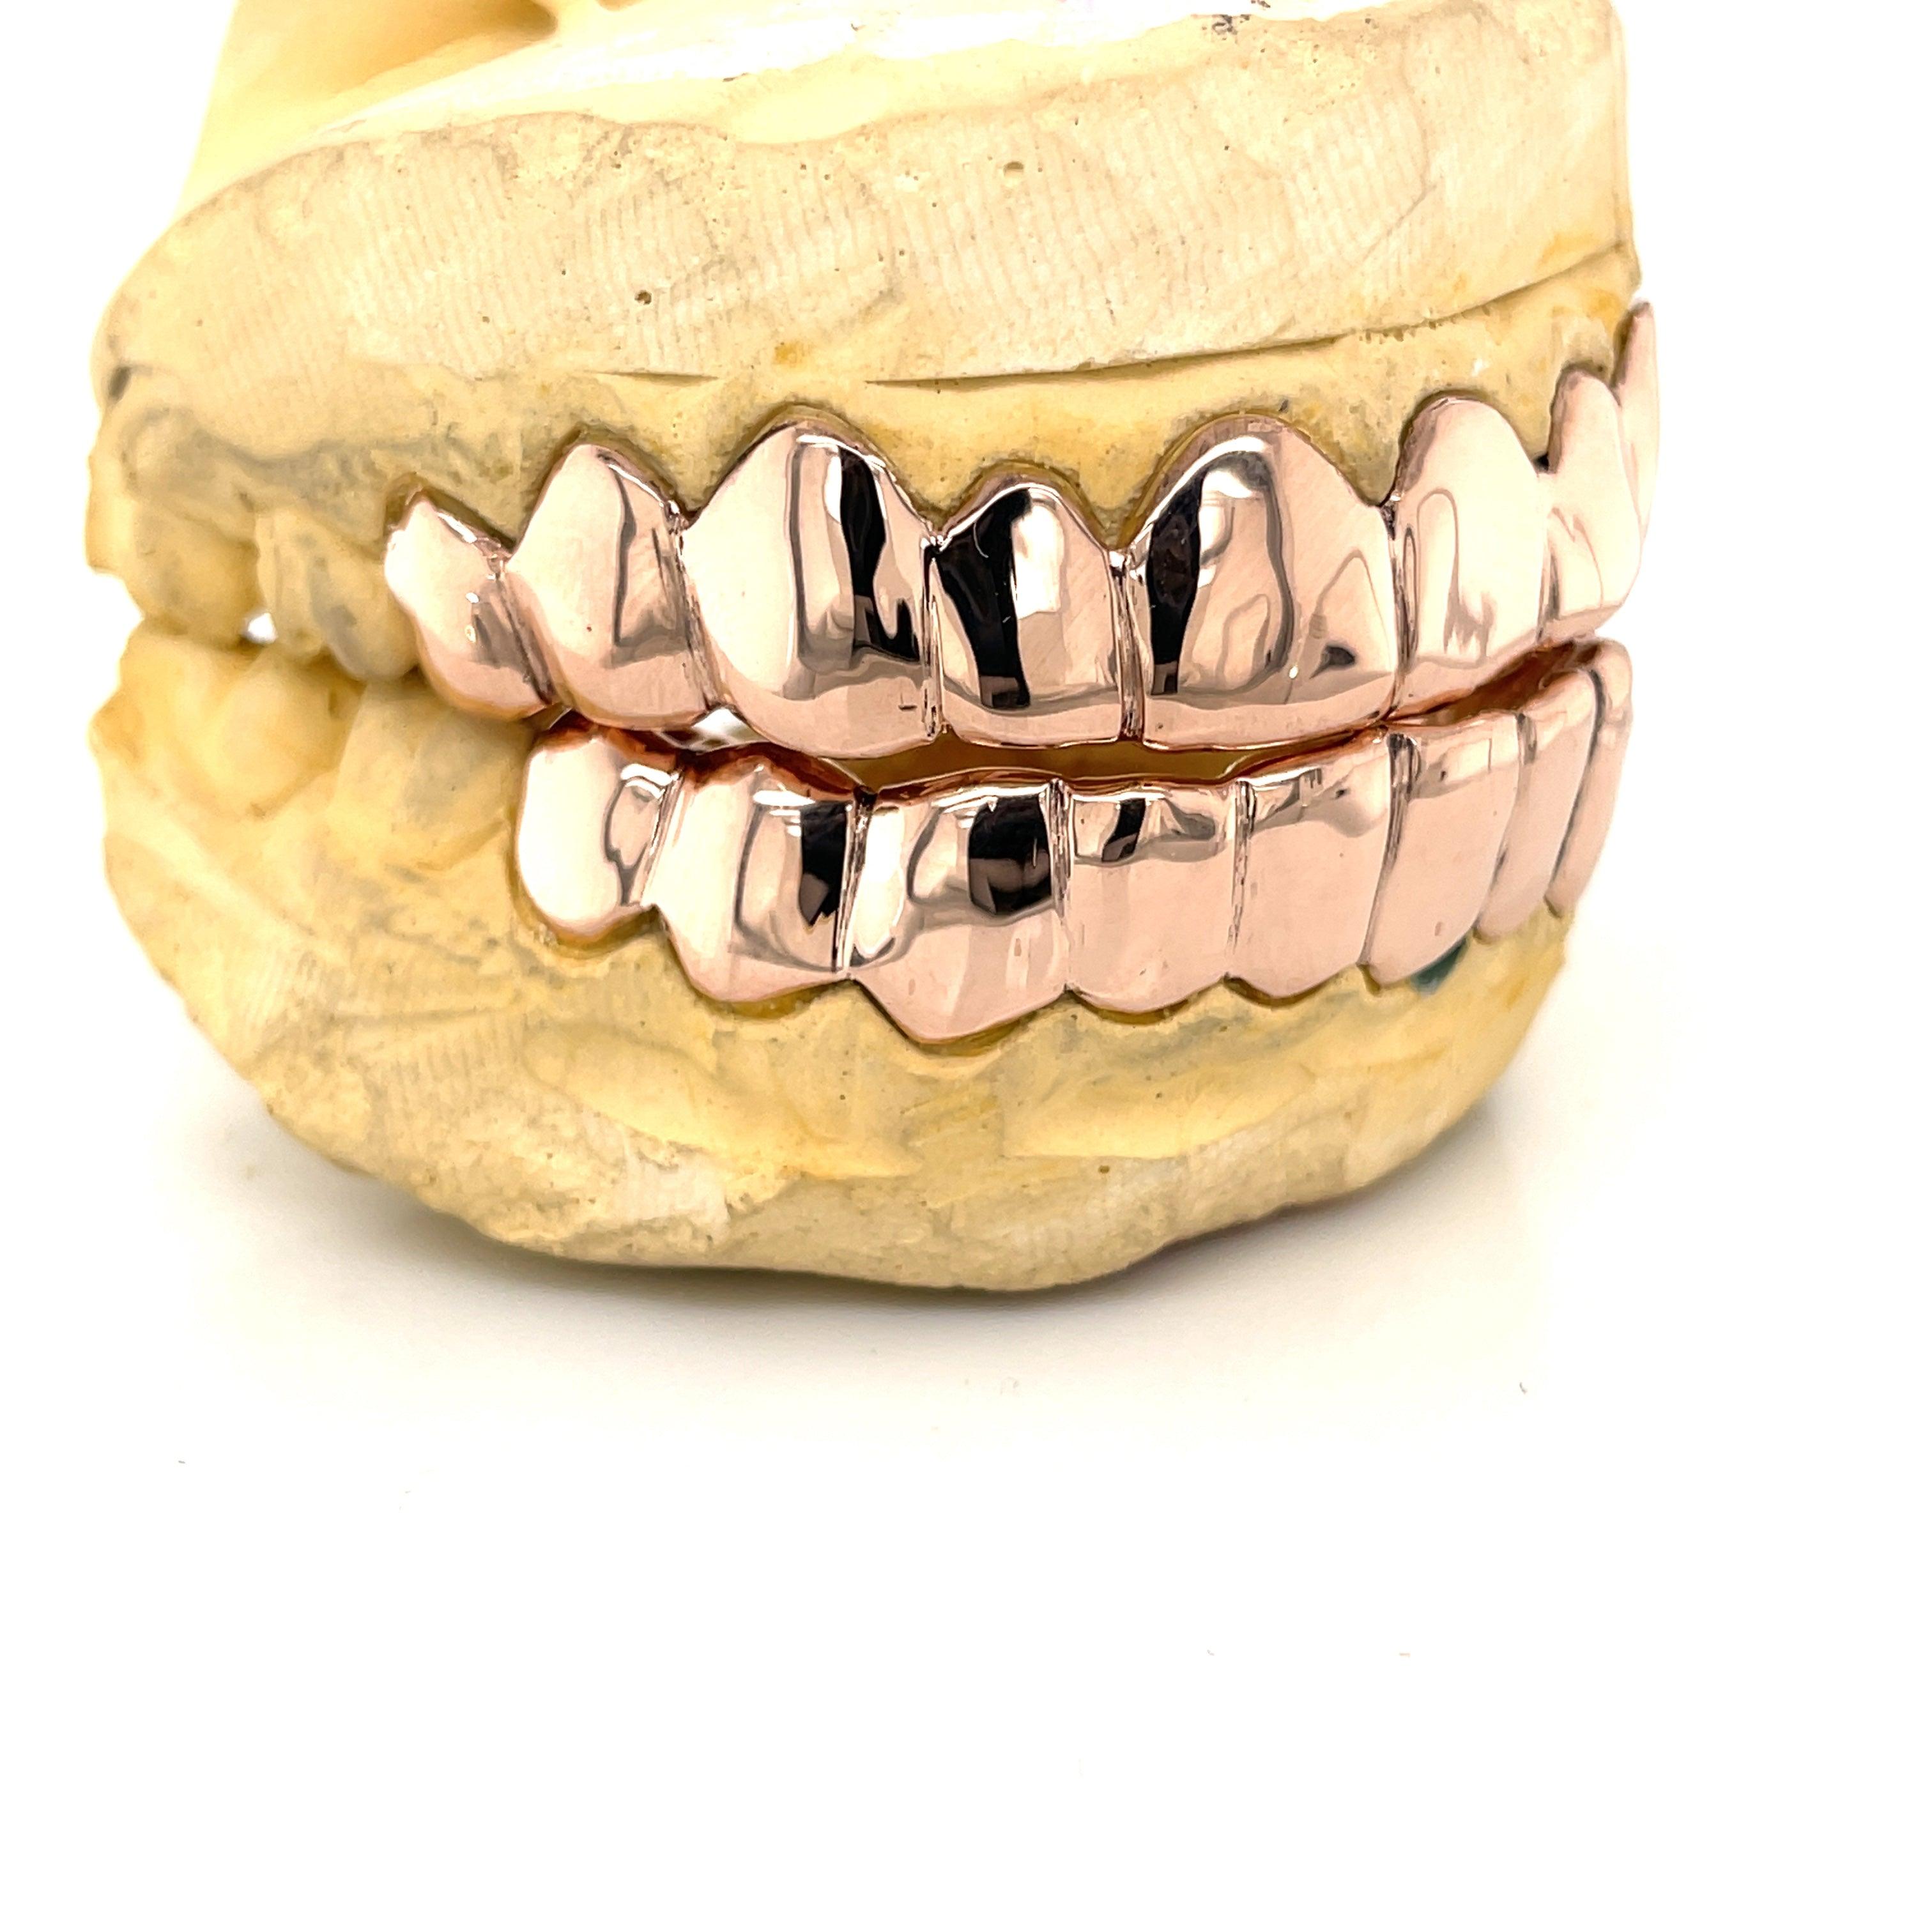 20pc Rose Gold Grillz - Seattle Gold Grillz